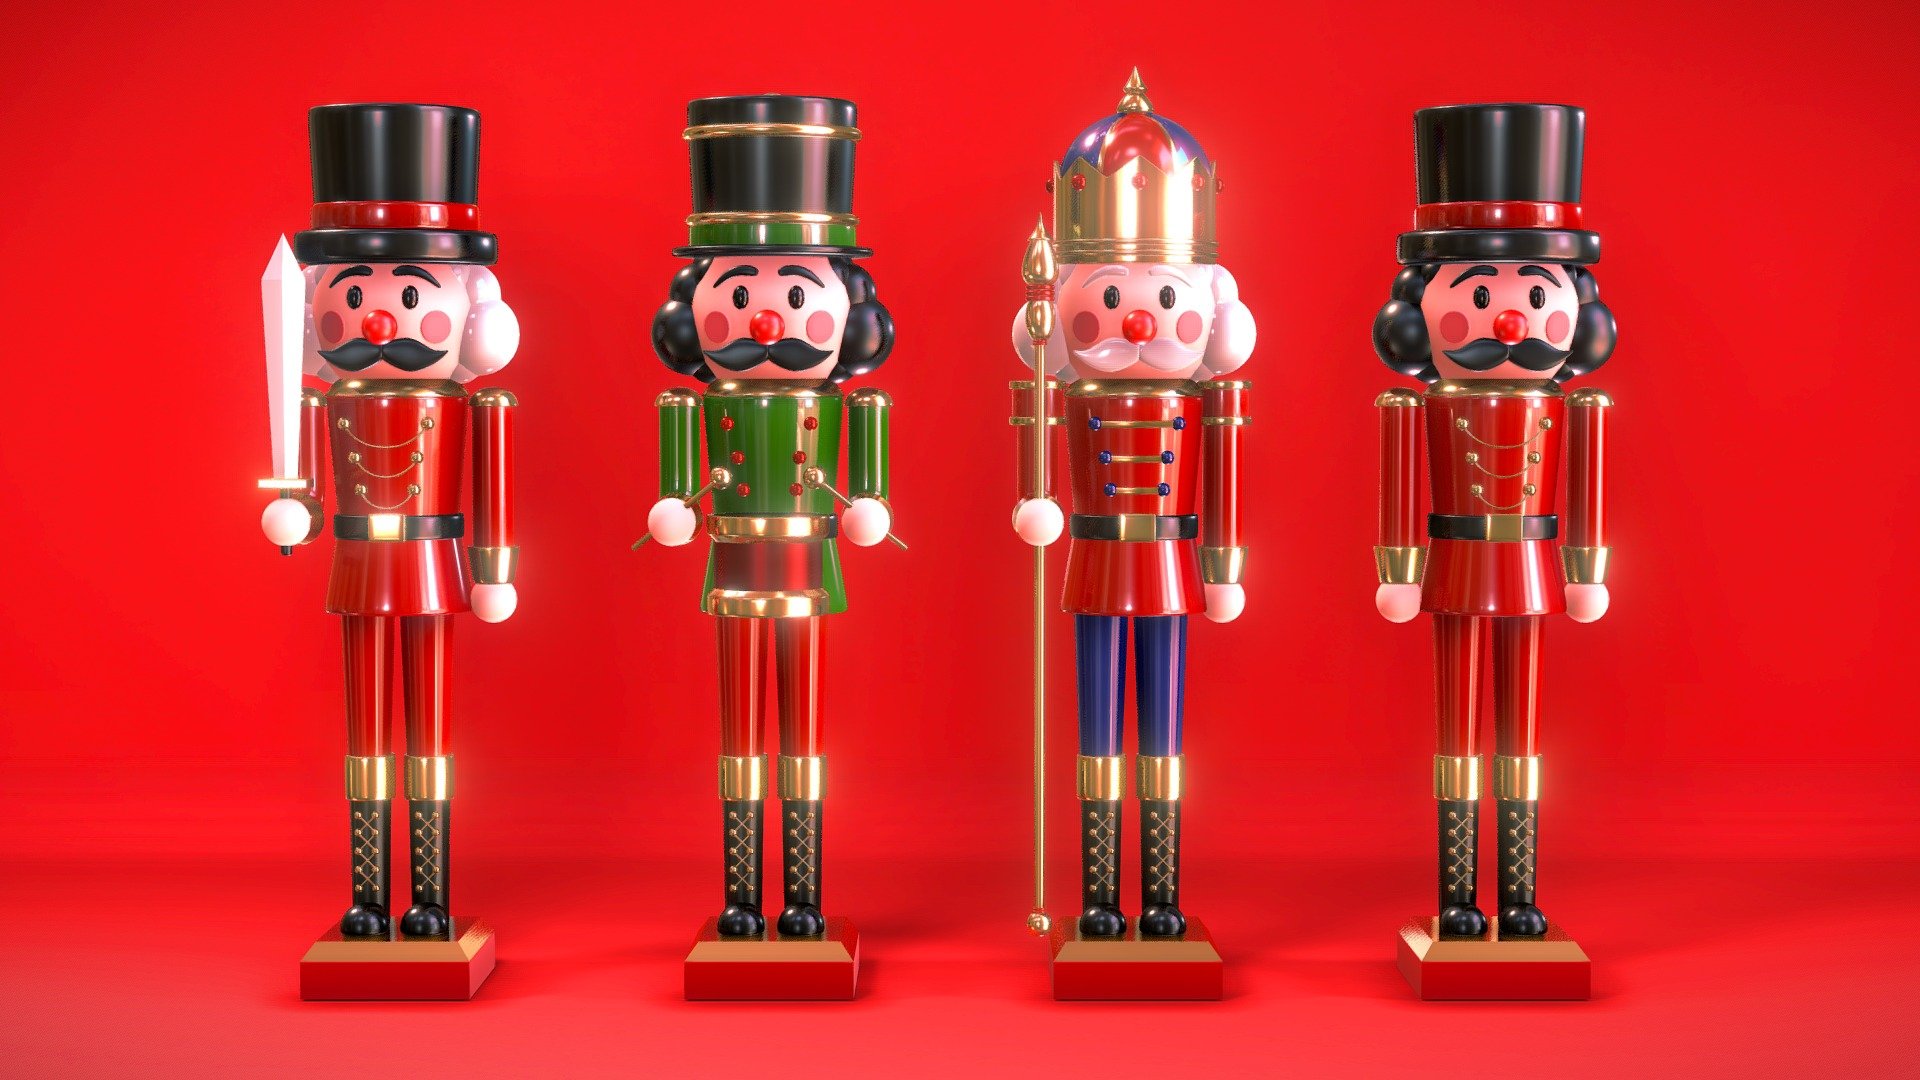 Here are nutcrackers I made for Christmas time! It’s perfect to decorate your Holidays cards!!
I also attached a zipped folder with .blend file ( Blender ver. 3.3.2)!

 

 
Leave a comment and let me know what 3D models you’d like to see next!
If you need help just write me a message - stefan.lengyel1@gmail.com




Included files:





Christmas-Nutcrackers - sketchfab.blend

Christmas-Nutcrackers - sketchfab.fbx

Nutcracker 01.fbx

Nutcracker 02.fbx

Nutcracker 03.fbx

Nutcracker 04.fbx

Nutcrackers eevee render.png
  


Blender EEVEE render:





 - Christmas - Nutcrackers - Buy Royalty Free 3D model by Pixel (@stefan.lengyel1) 3d model